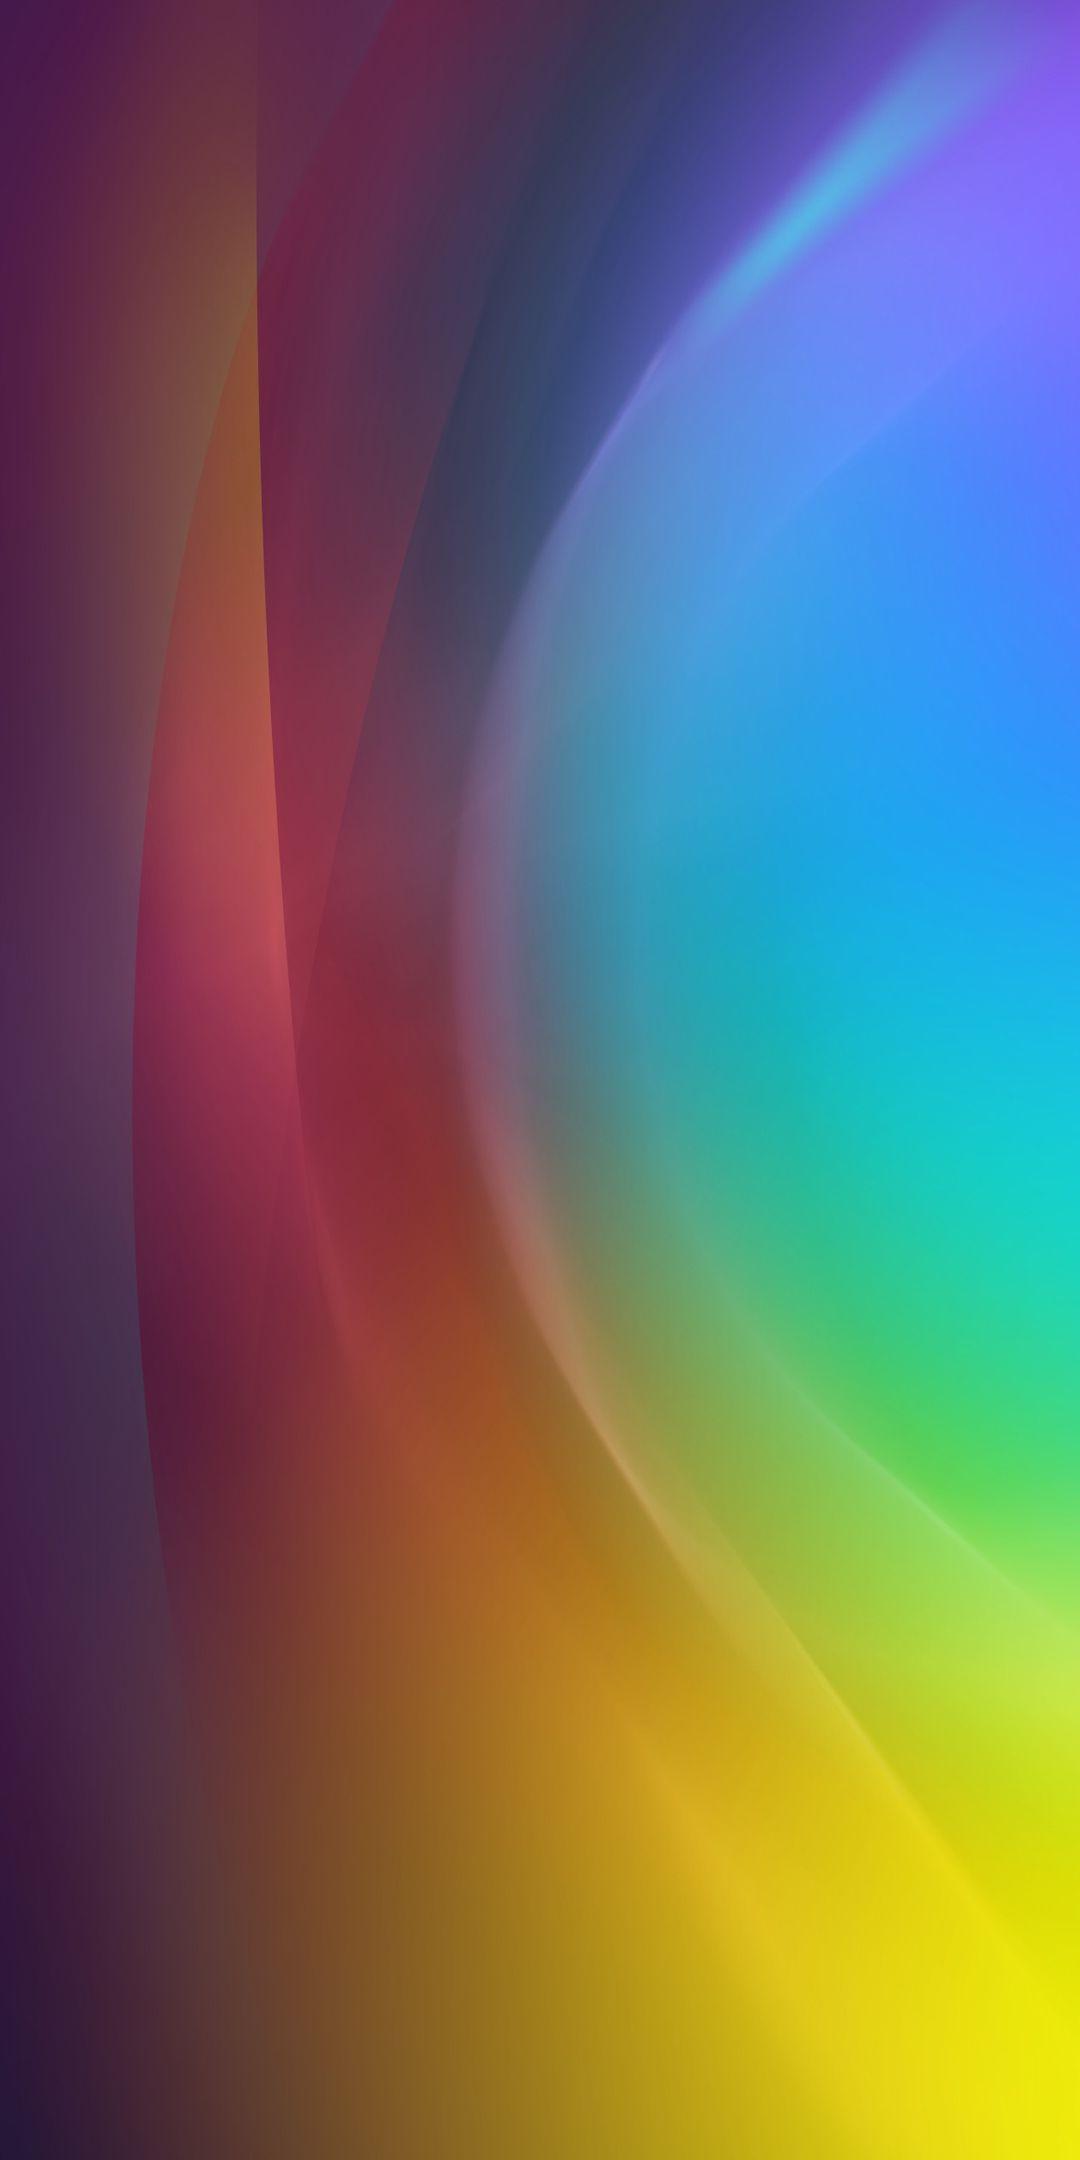 Huawei Mate 10 Pro Wallpaper 01 of 10 with Abstract Light. HD